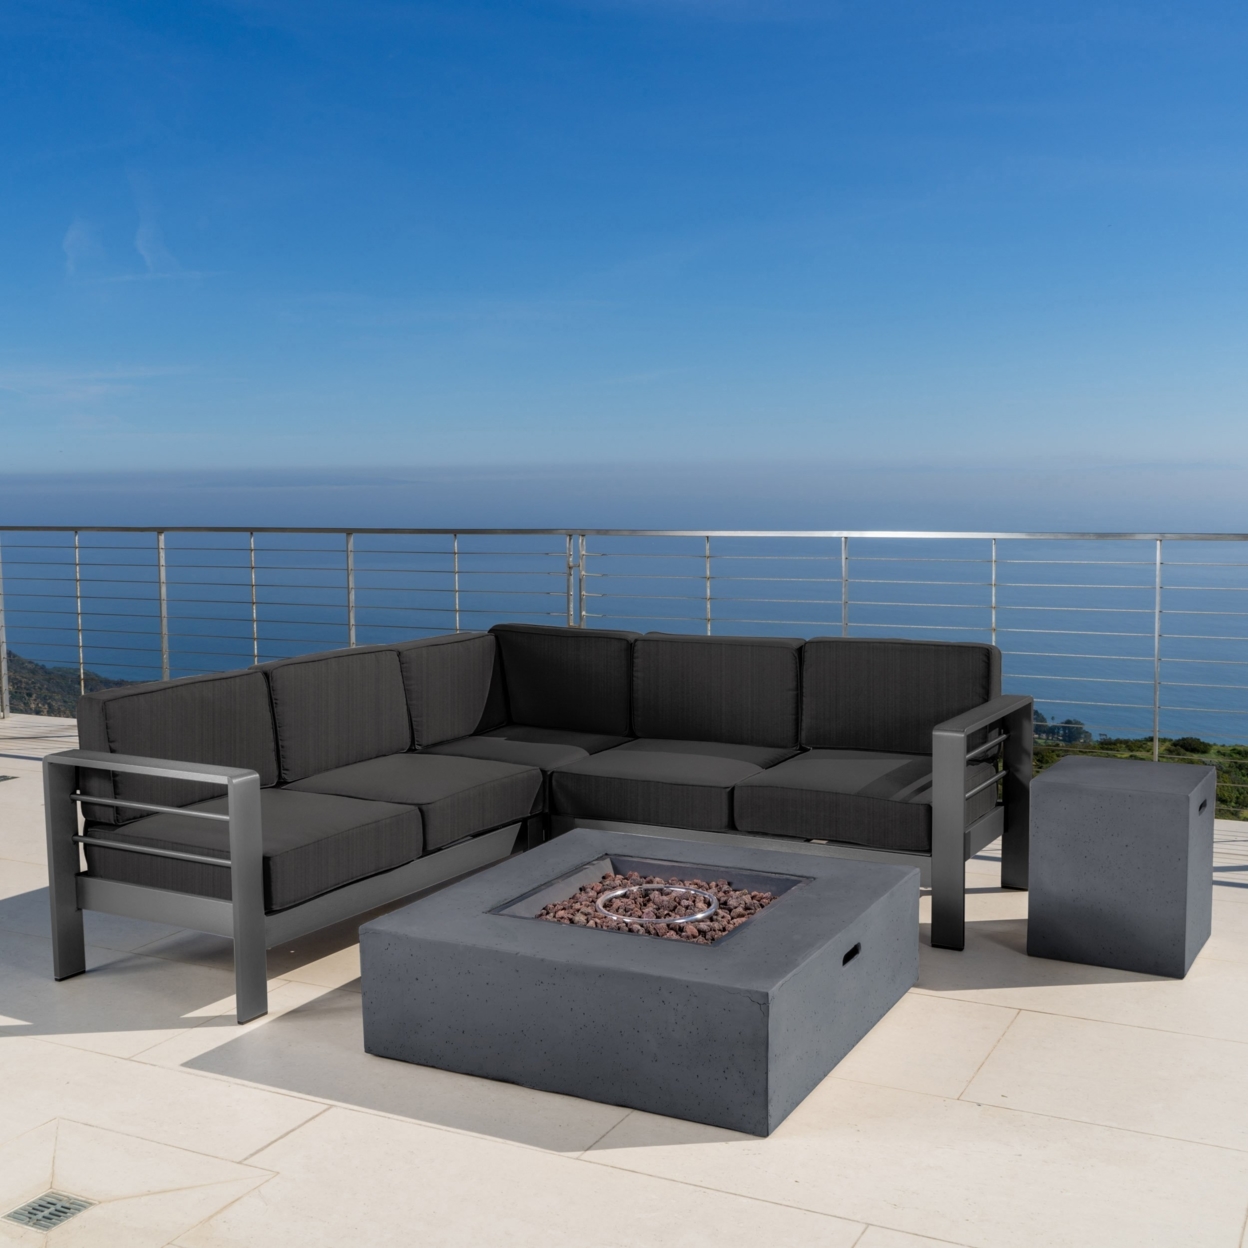 Coral Bay Outdoor Grey Aluminum 5 Piece V-Shape Sectional Sofa Set With Fire Table - Light Grey